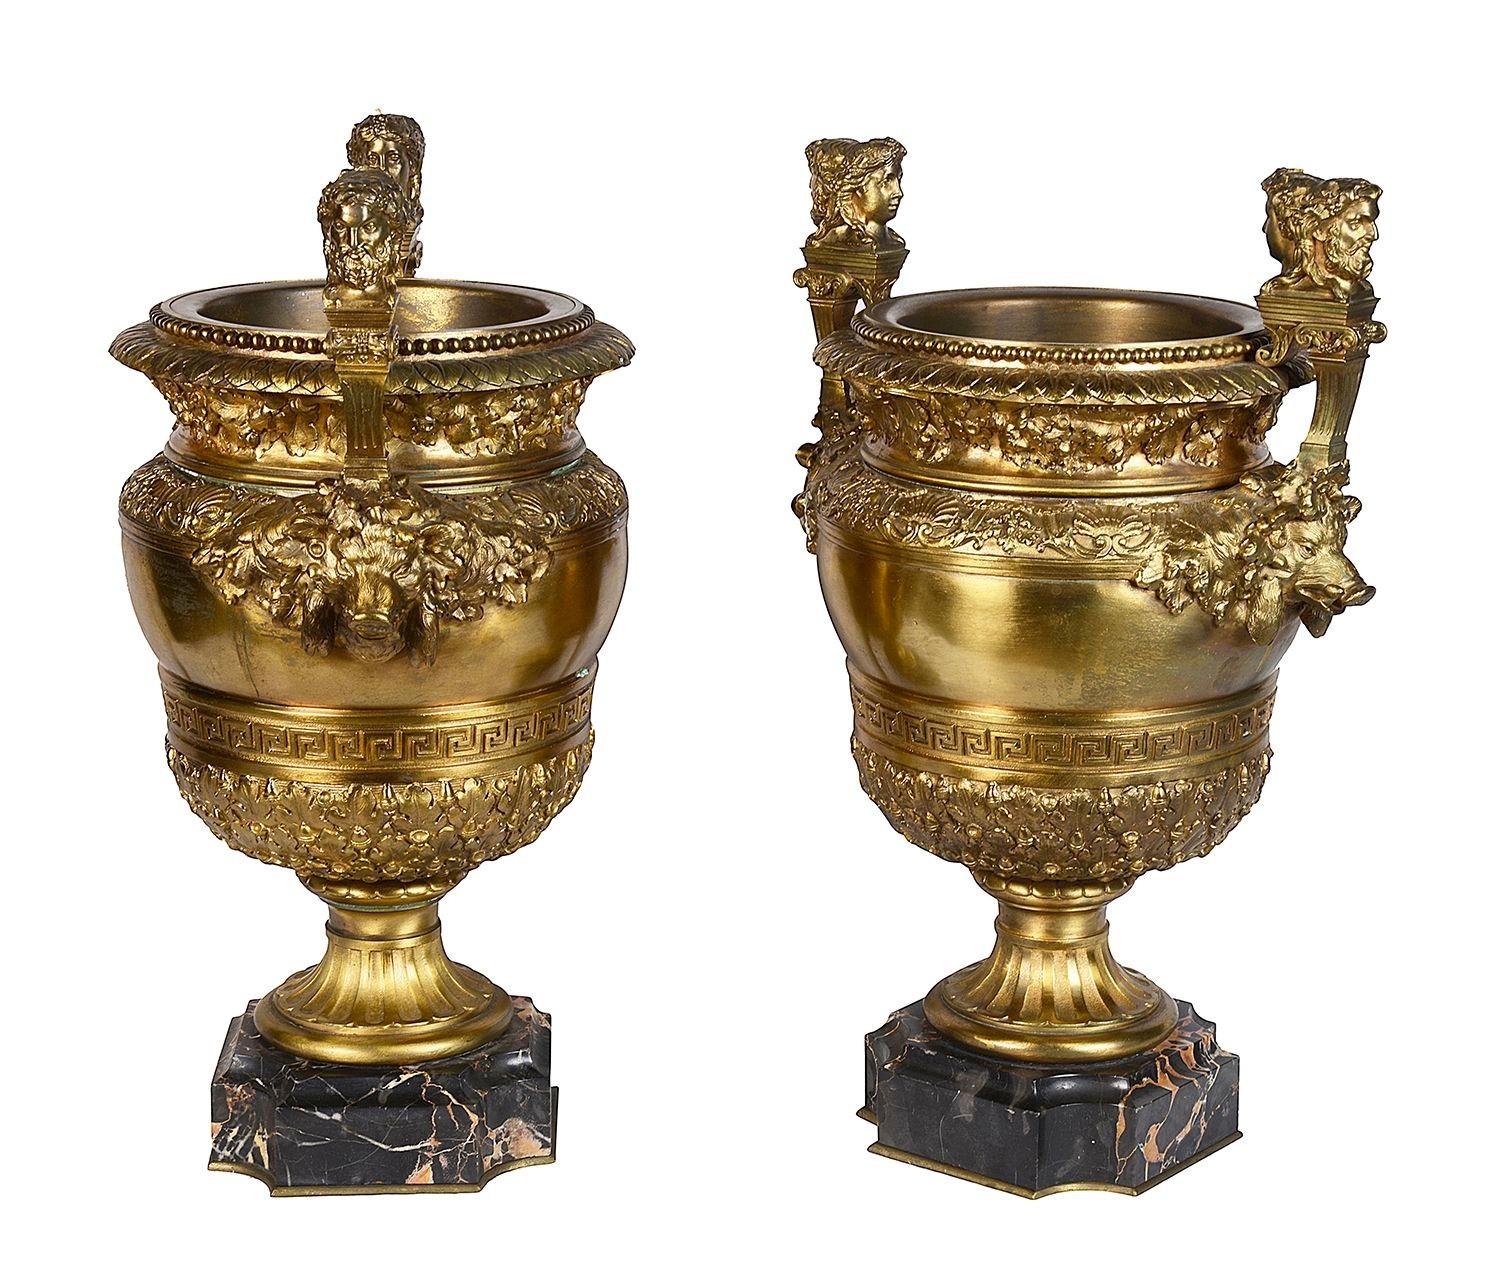 A very impressive pair of Classical 19th Century French gilded ormolu urns.
Each with two-headed Janus finials, the sides with boar's masks and bands of shells, oak leaves and Greek key pattern decoration, raised on pedestal bases and mounted on